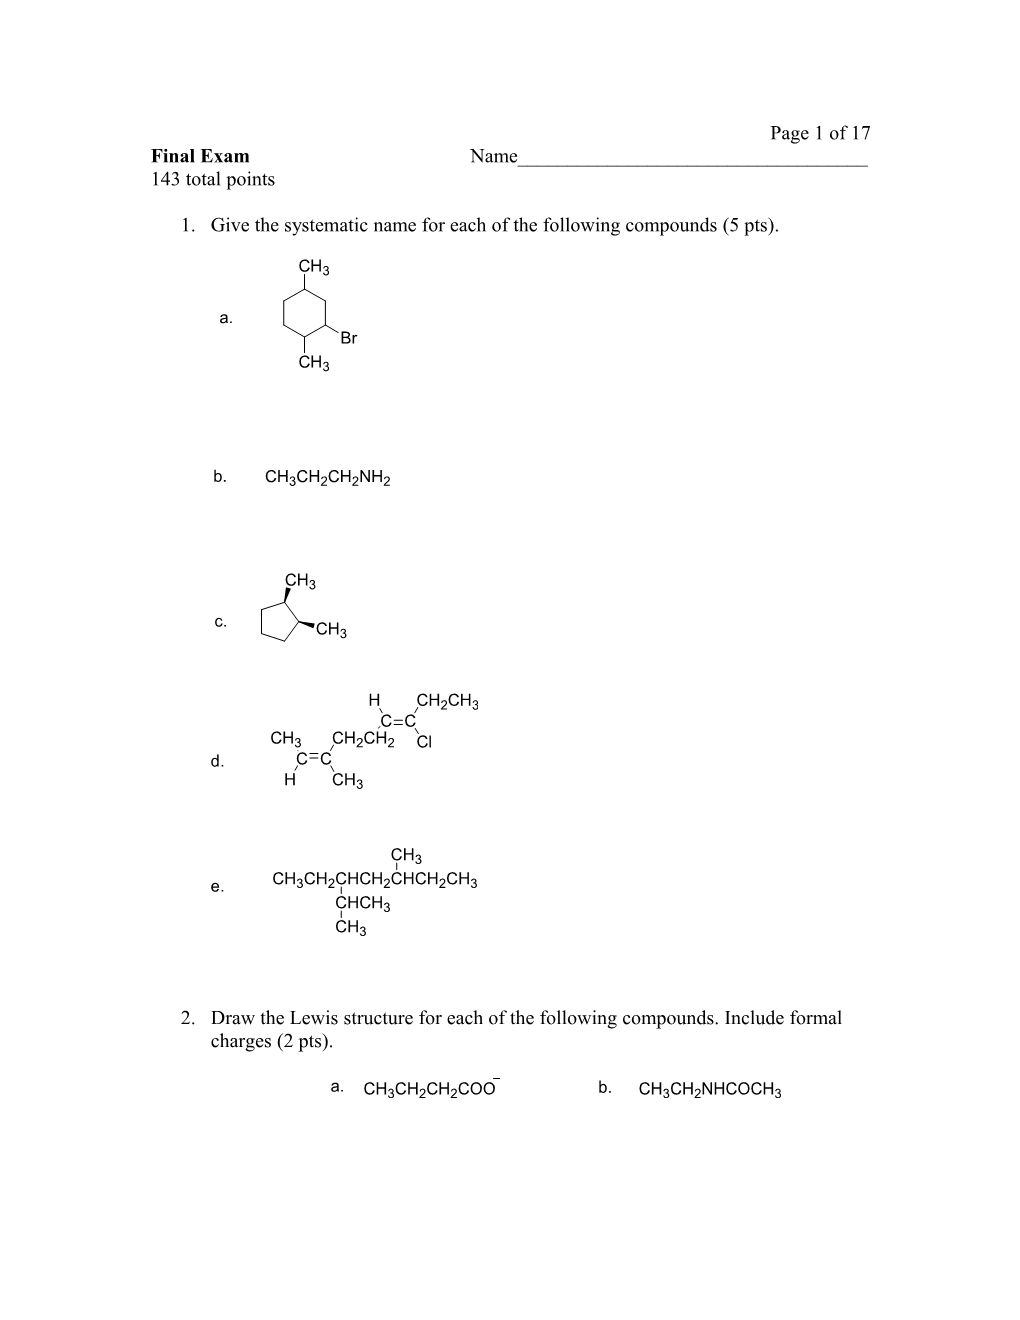 1. Give the Systematic Name for Each of the Following Compounds (5 Pts)